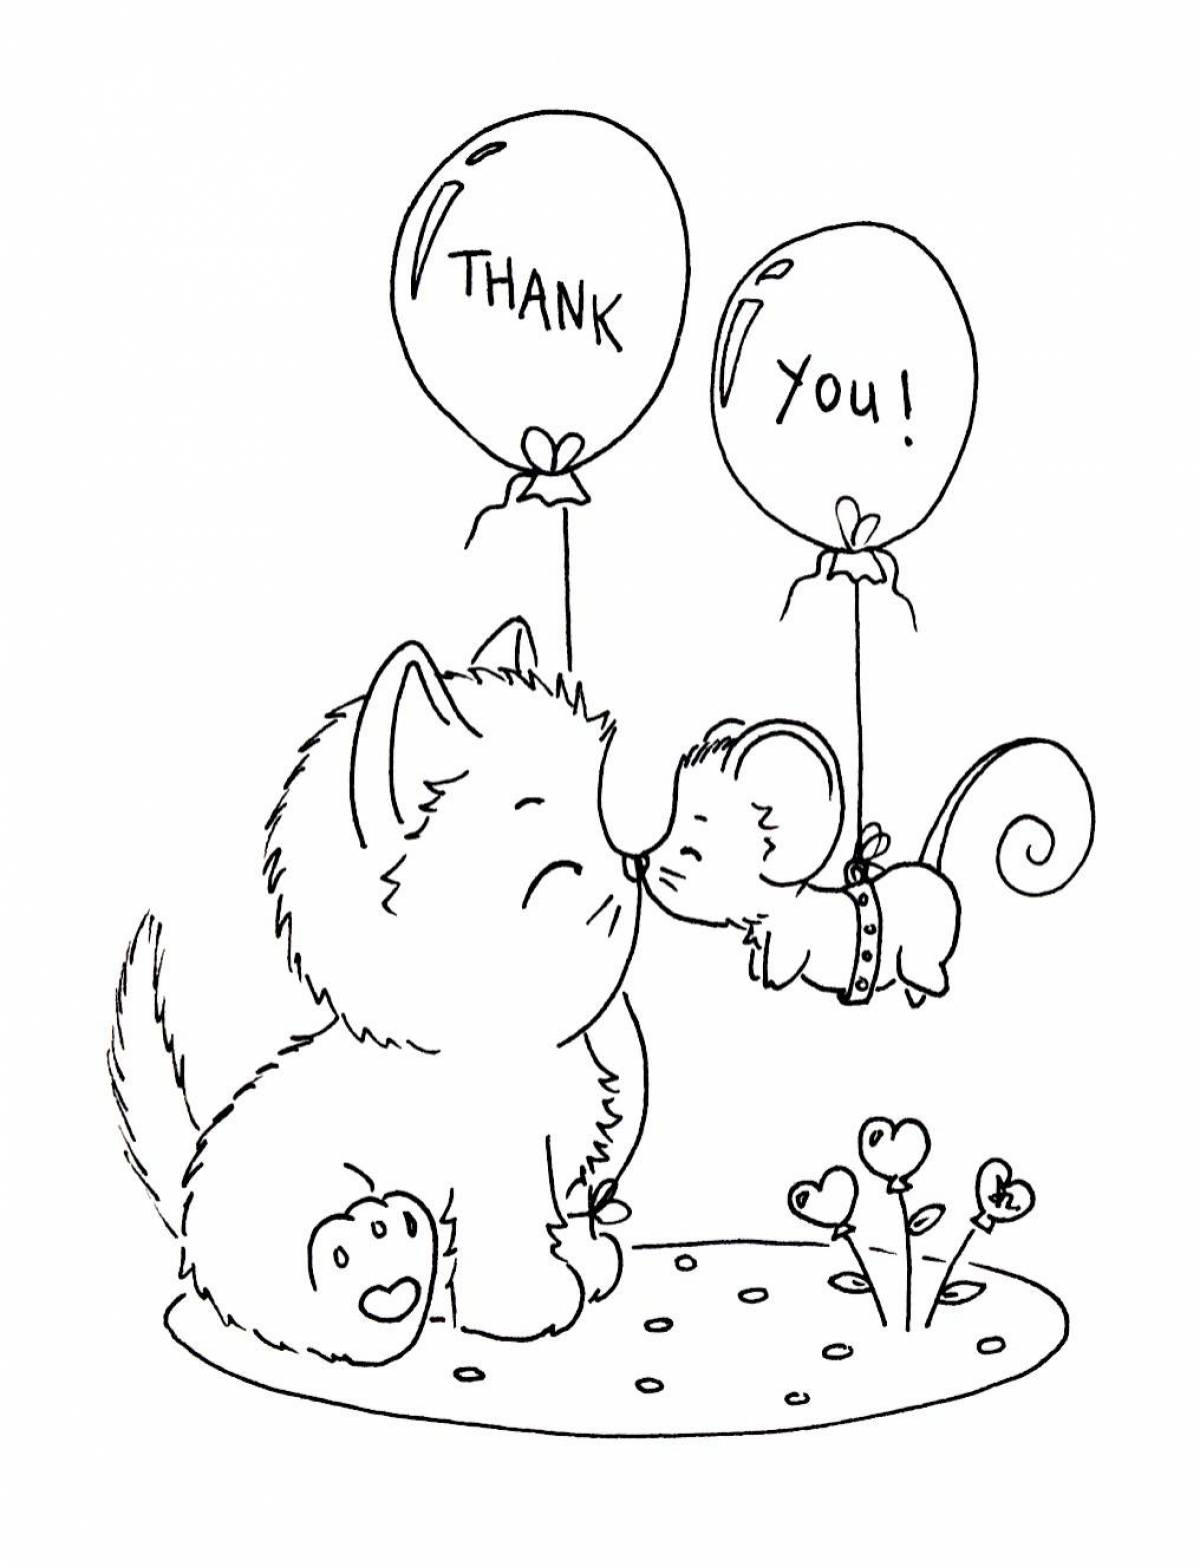 Shining Thank You coloring page